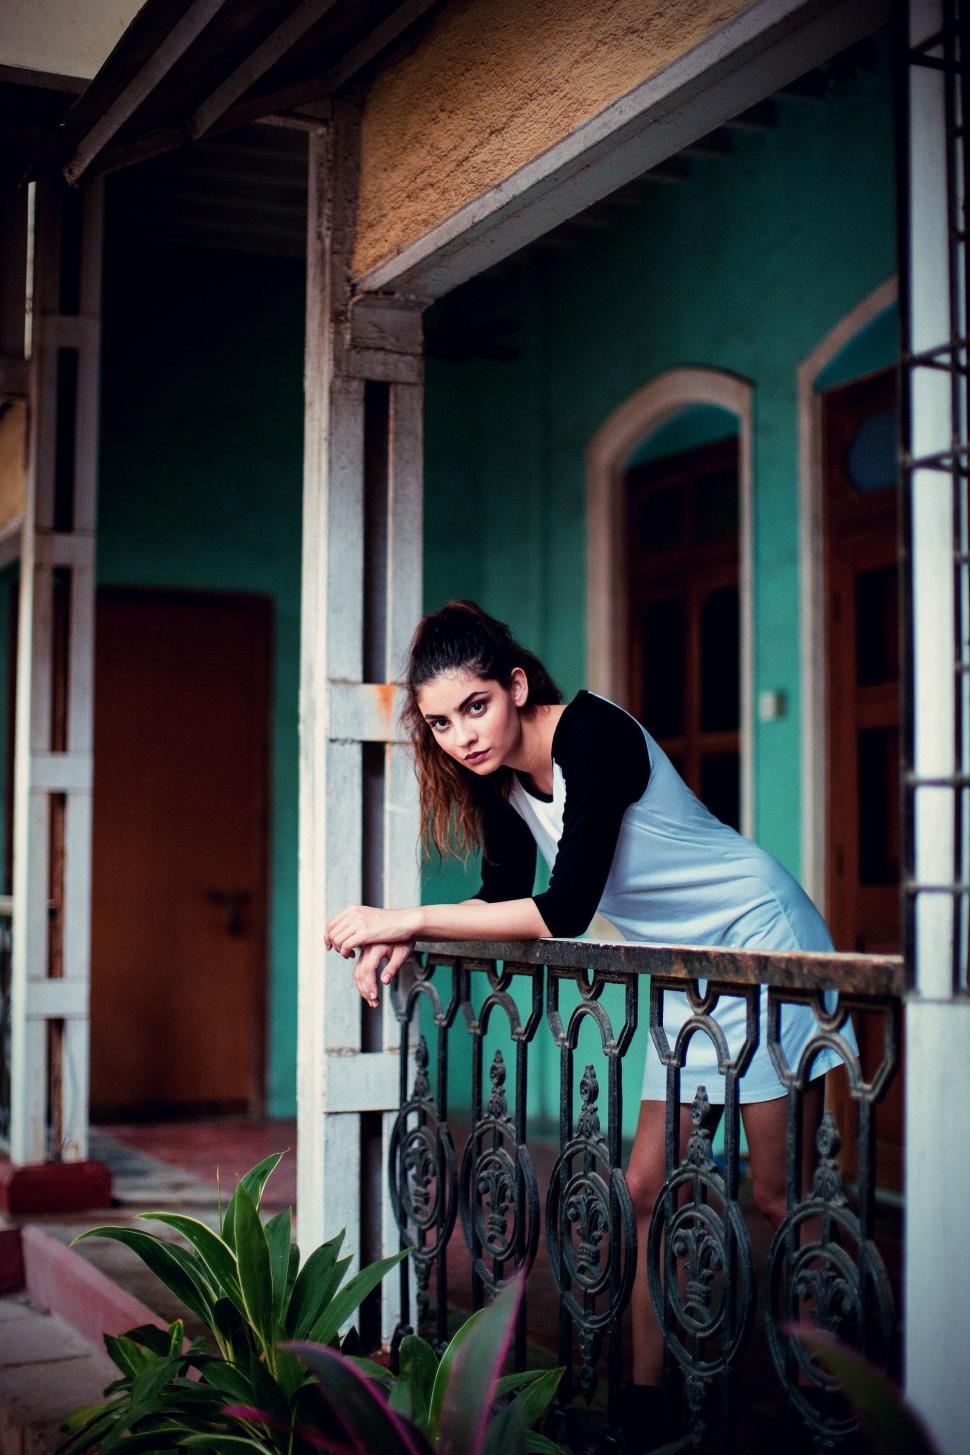 Free Image of Woman Leaning on Railing in Front of Building 